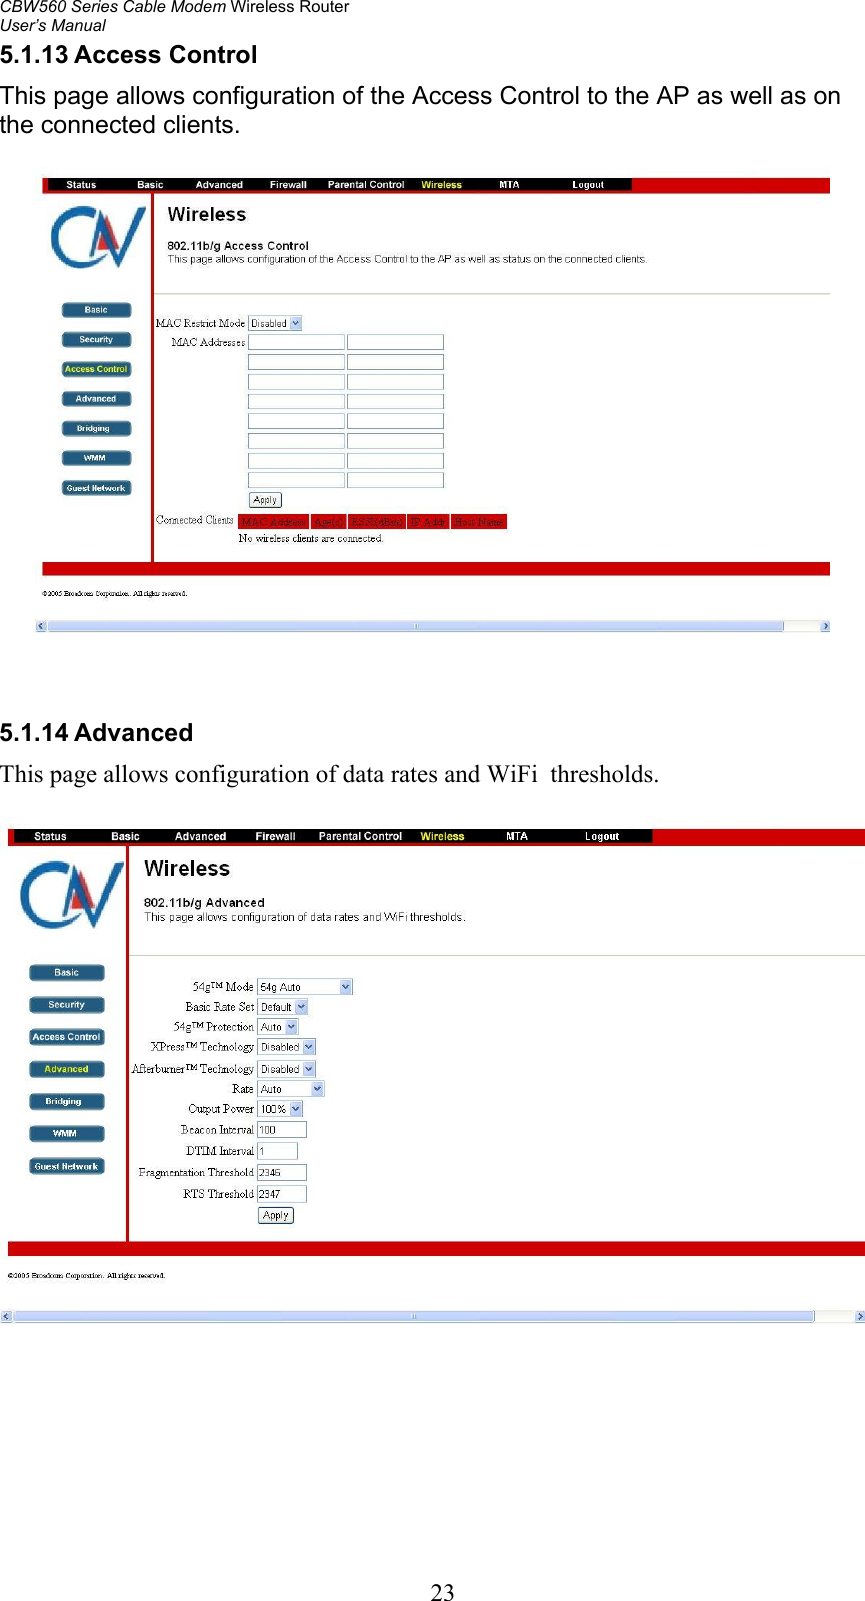 CBW560 Series Cable Modem Wireless Router User’s Manual   235.1.13 Access Control This page allows configuration of the Access Control to the AP as well as on the connected clients.      5.1.14 Advanced This page allows configuration of data rates and WiFi  thresholds.         